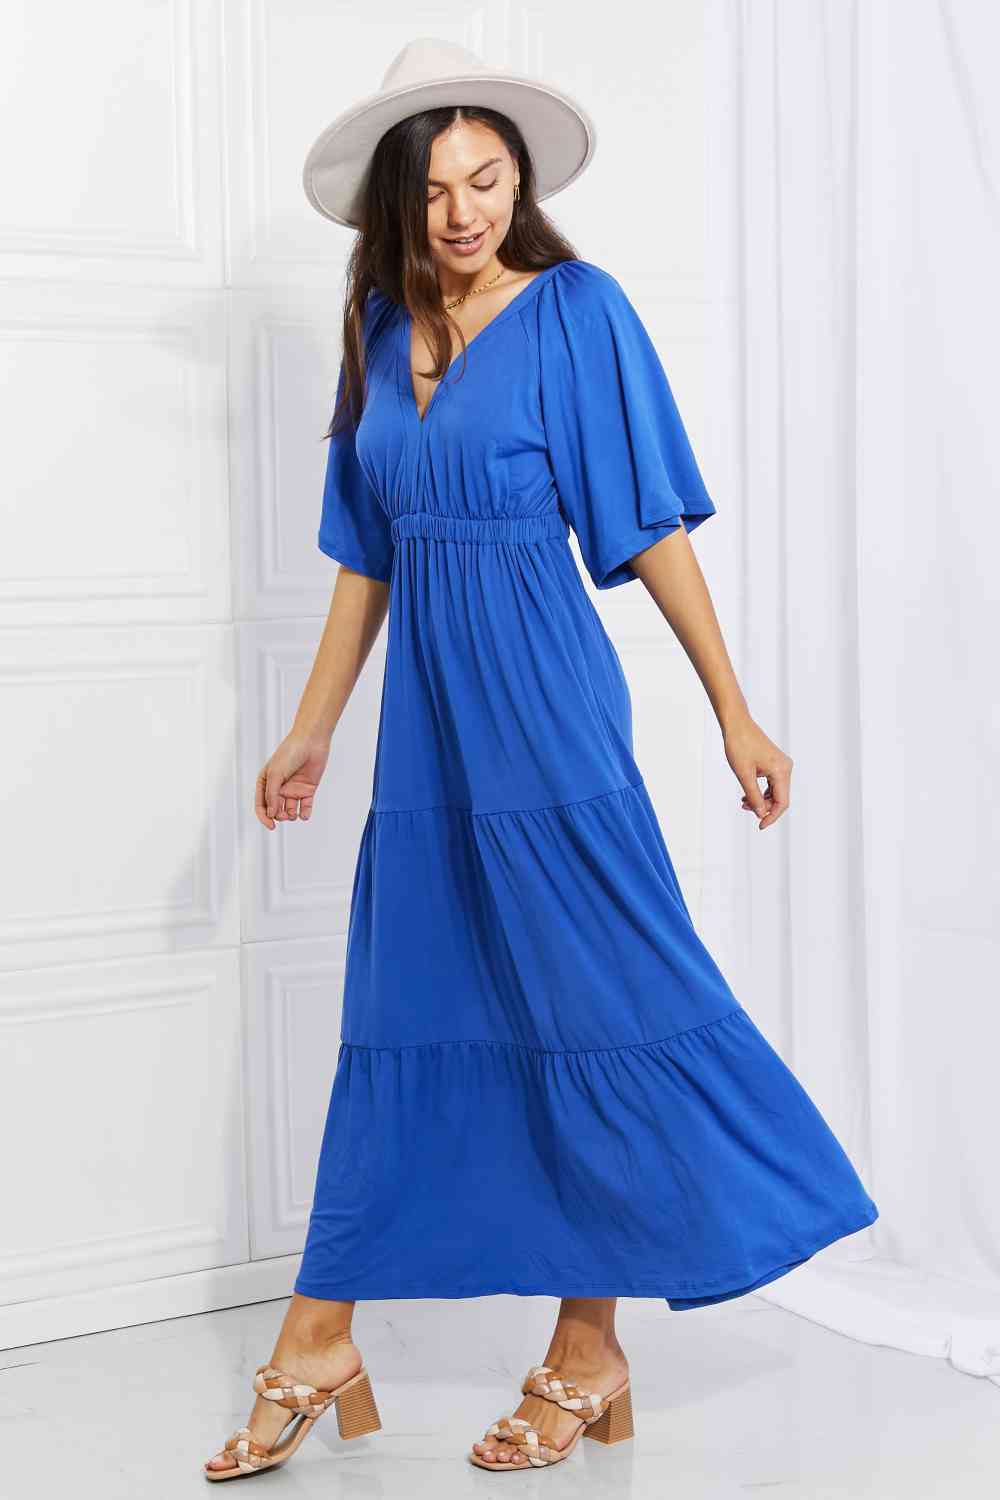 My Muse Flare Sleeve Tiered Maxi Dress - All Dresses - Dresses - 6 - 2024